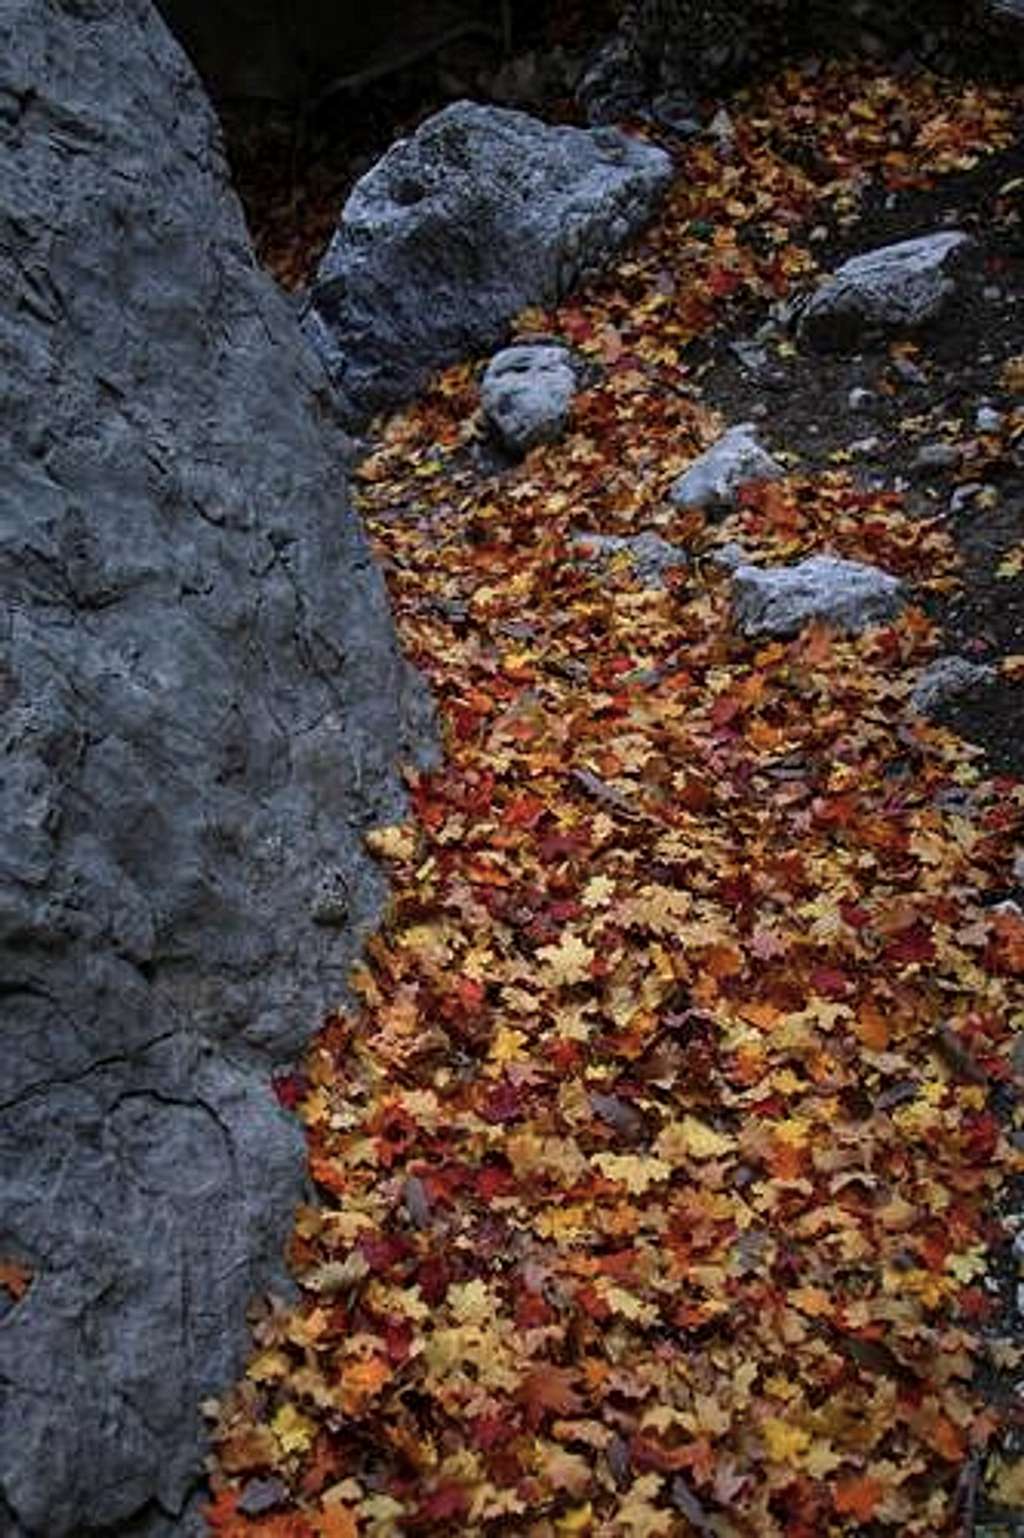 Fallen Leaves - Pine Spring Canyon